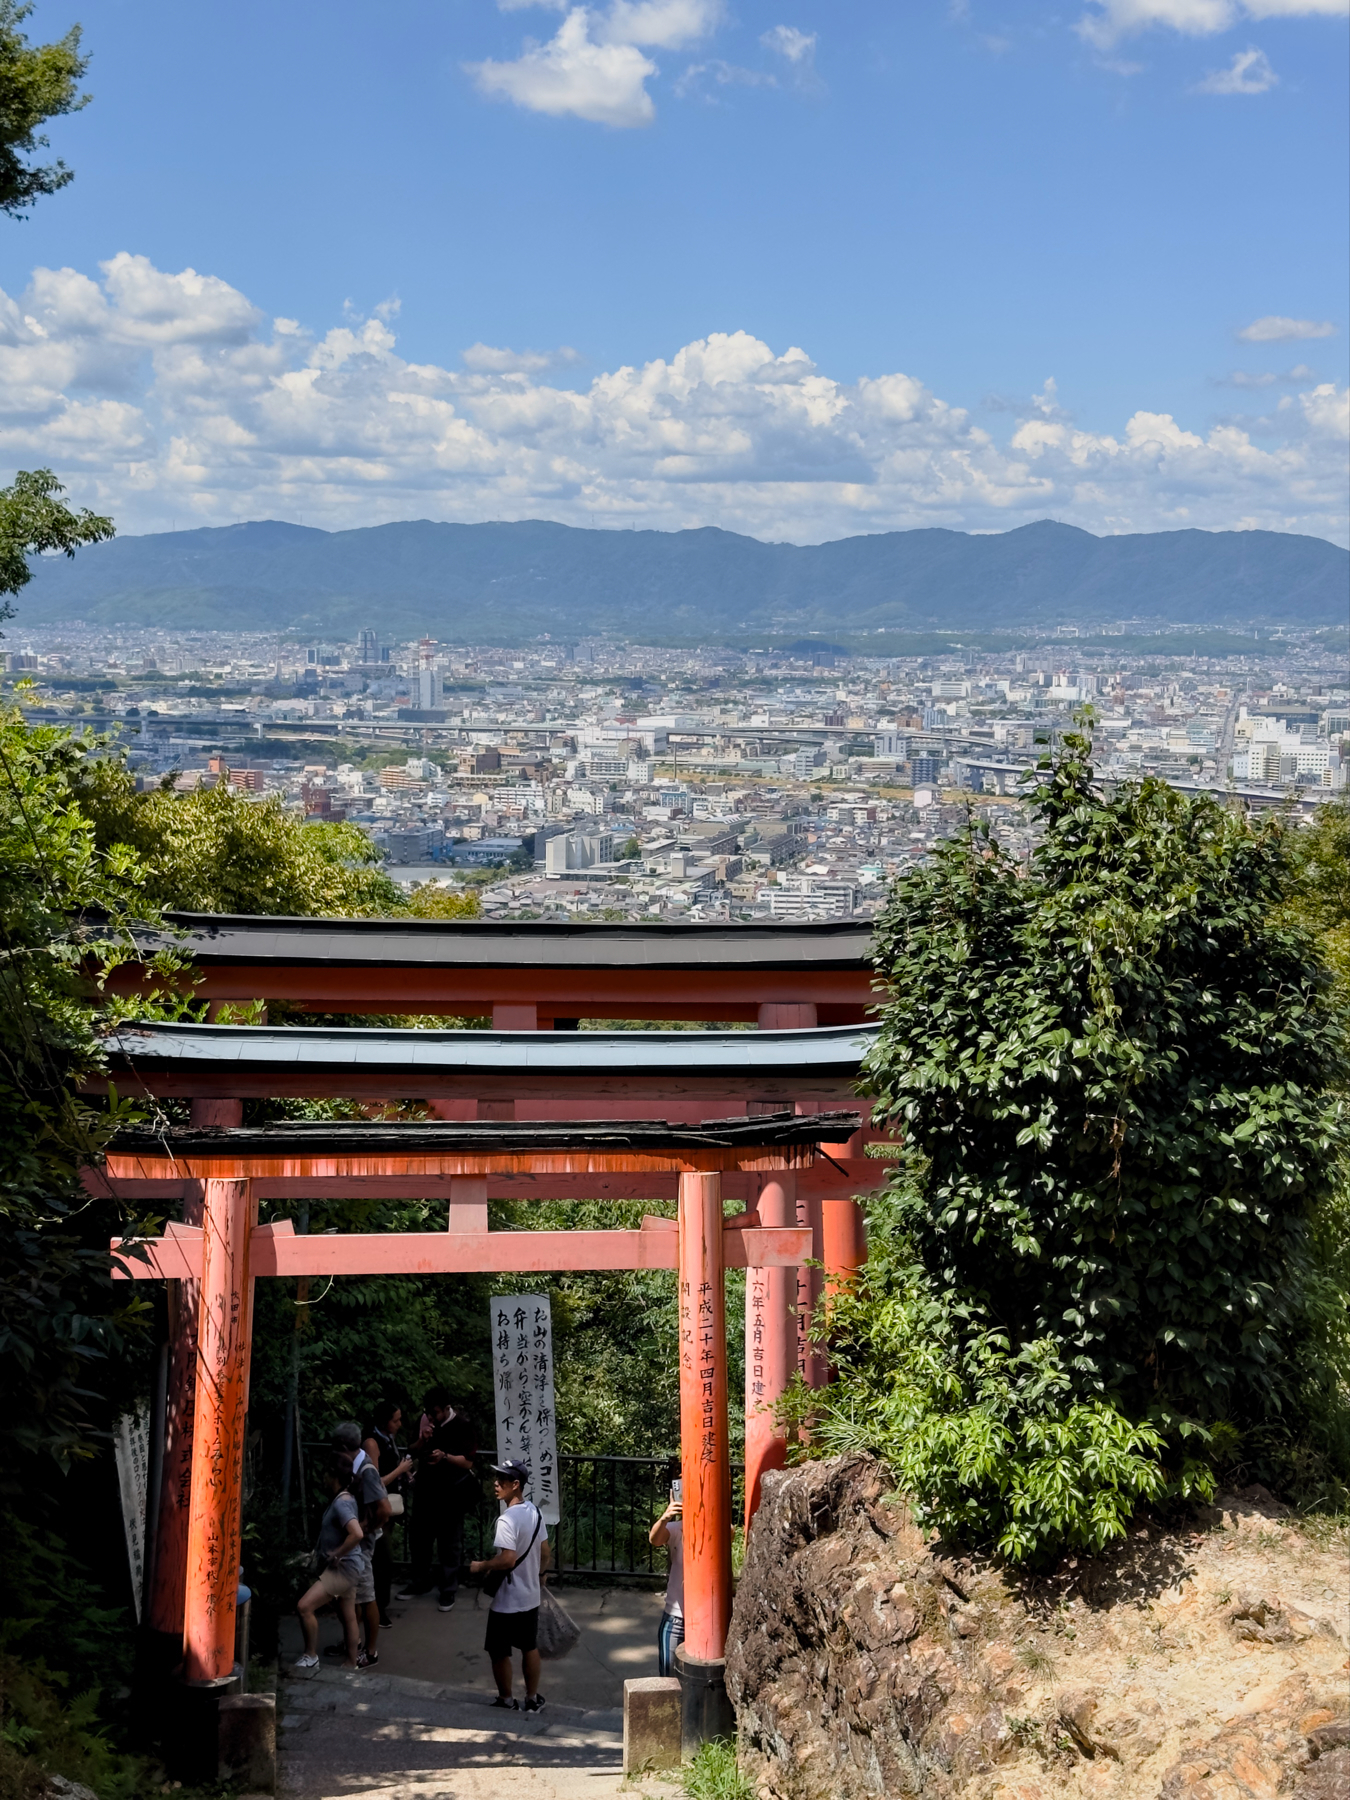 A view of Kyoto with the Torii gates visible in the foreground.